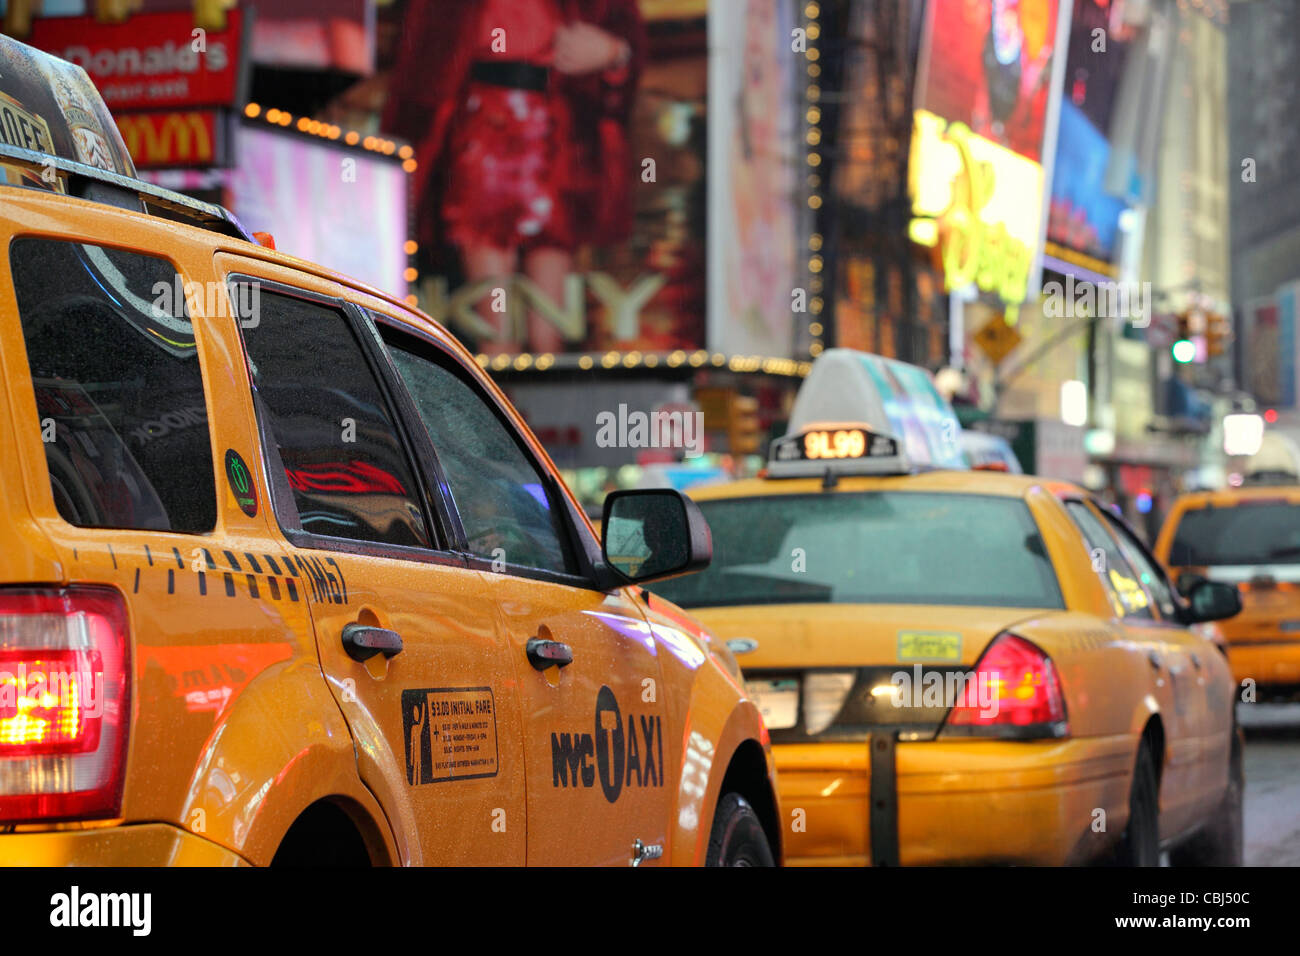 rear view of iconic yellow taxi cabs queuing on Broadway going through Times Square, Manhattan, New York City, NYC, USA Stock Photo